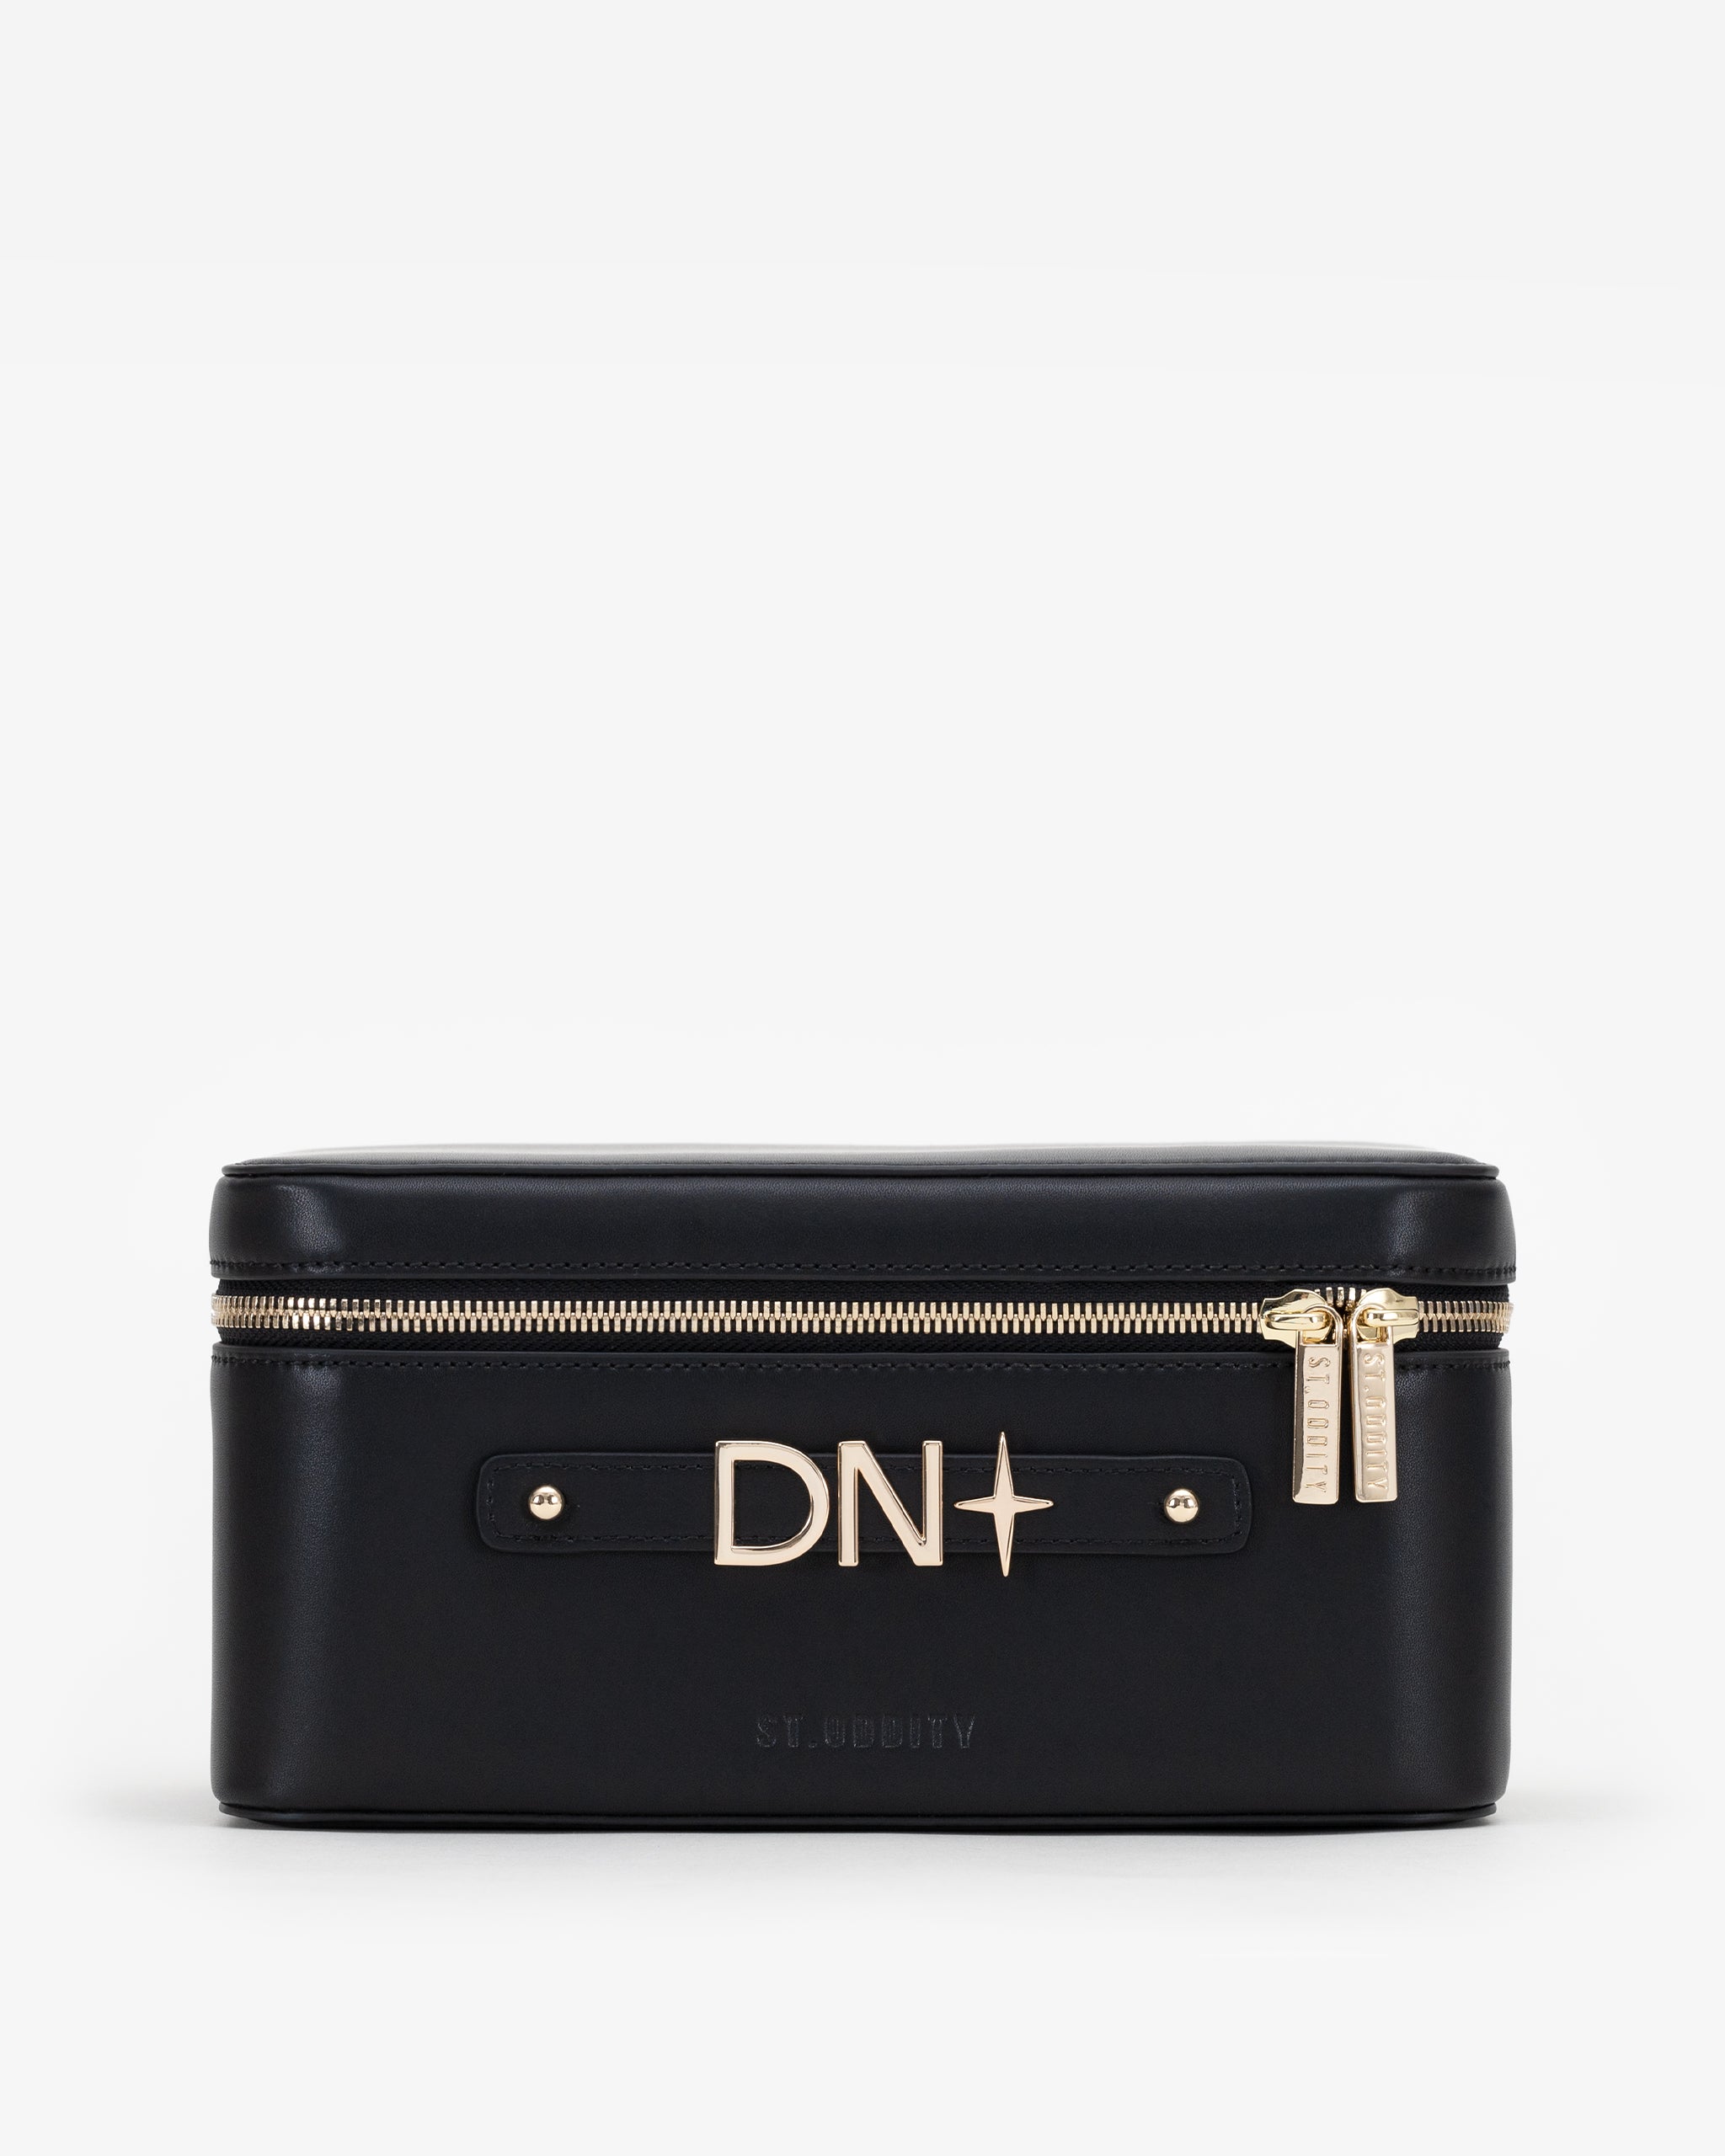 Pre-order (Mid-May): Vanity Case in Black/Gold with Personalised Hardware